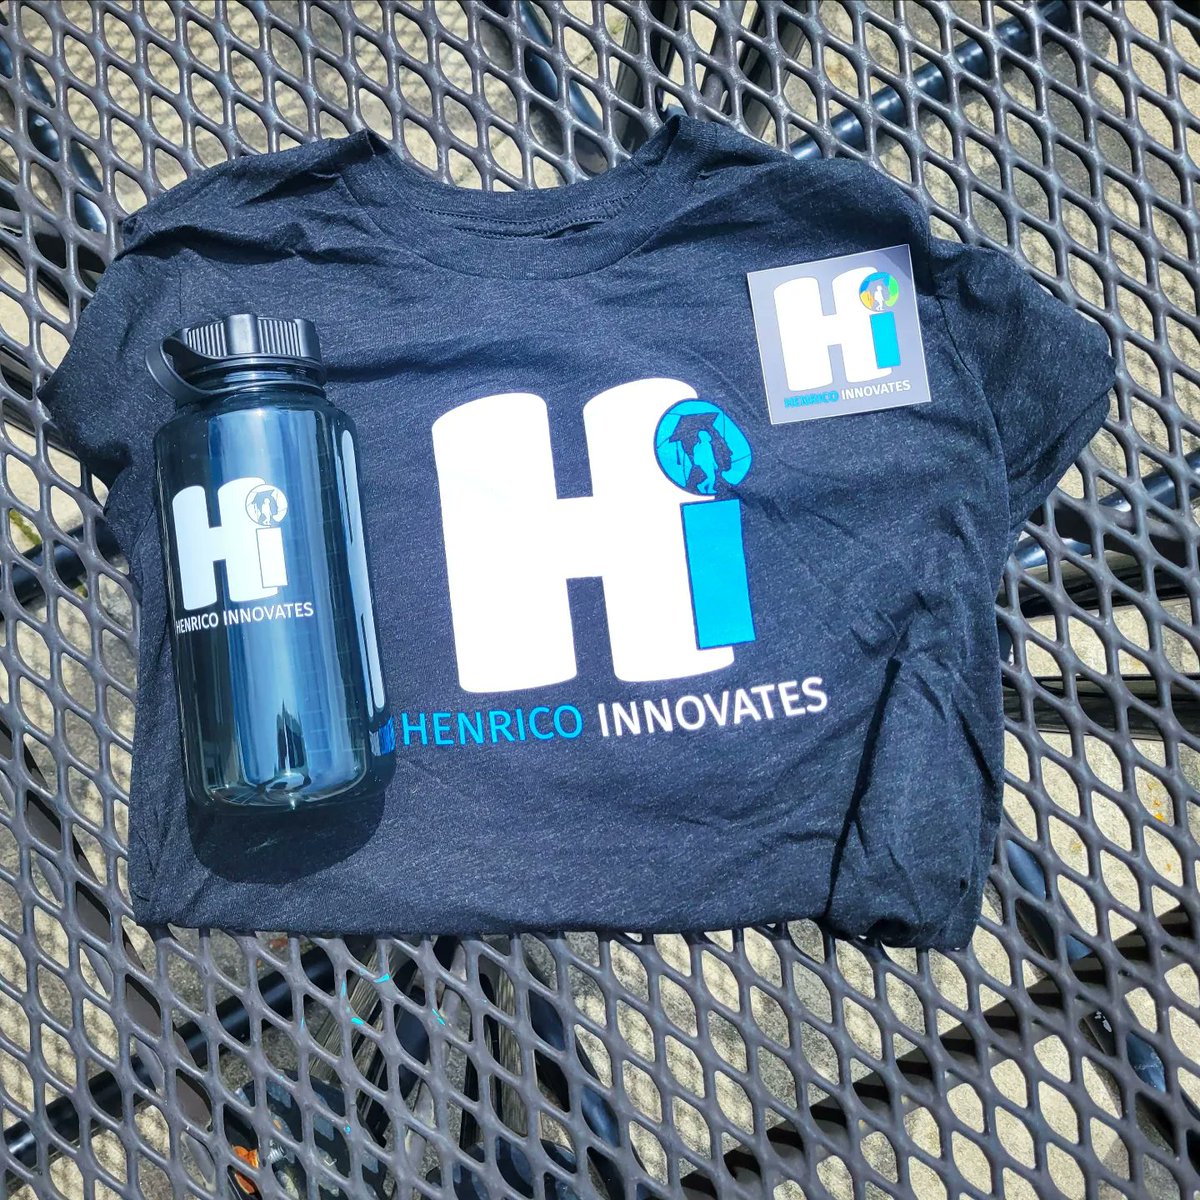 Started off the next phase of my career today with #HenricoInnovates. Thanks to @HCPS_Innovates for the introduction to some exciting tools. Can't wait to get in the classroom in Henrico County!